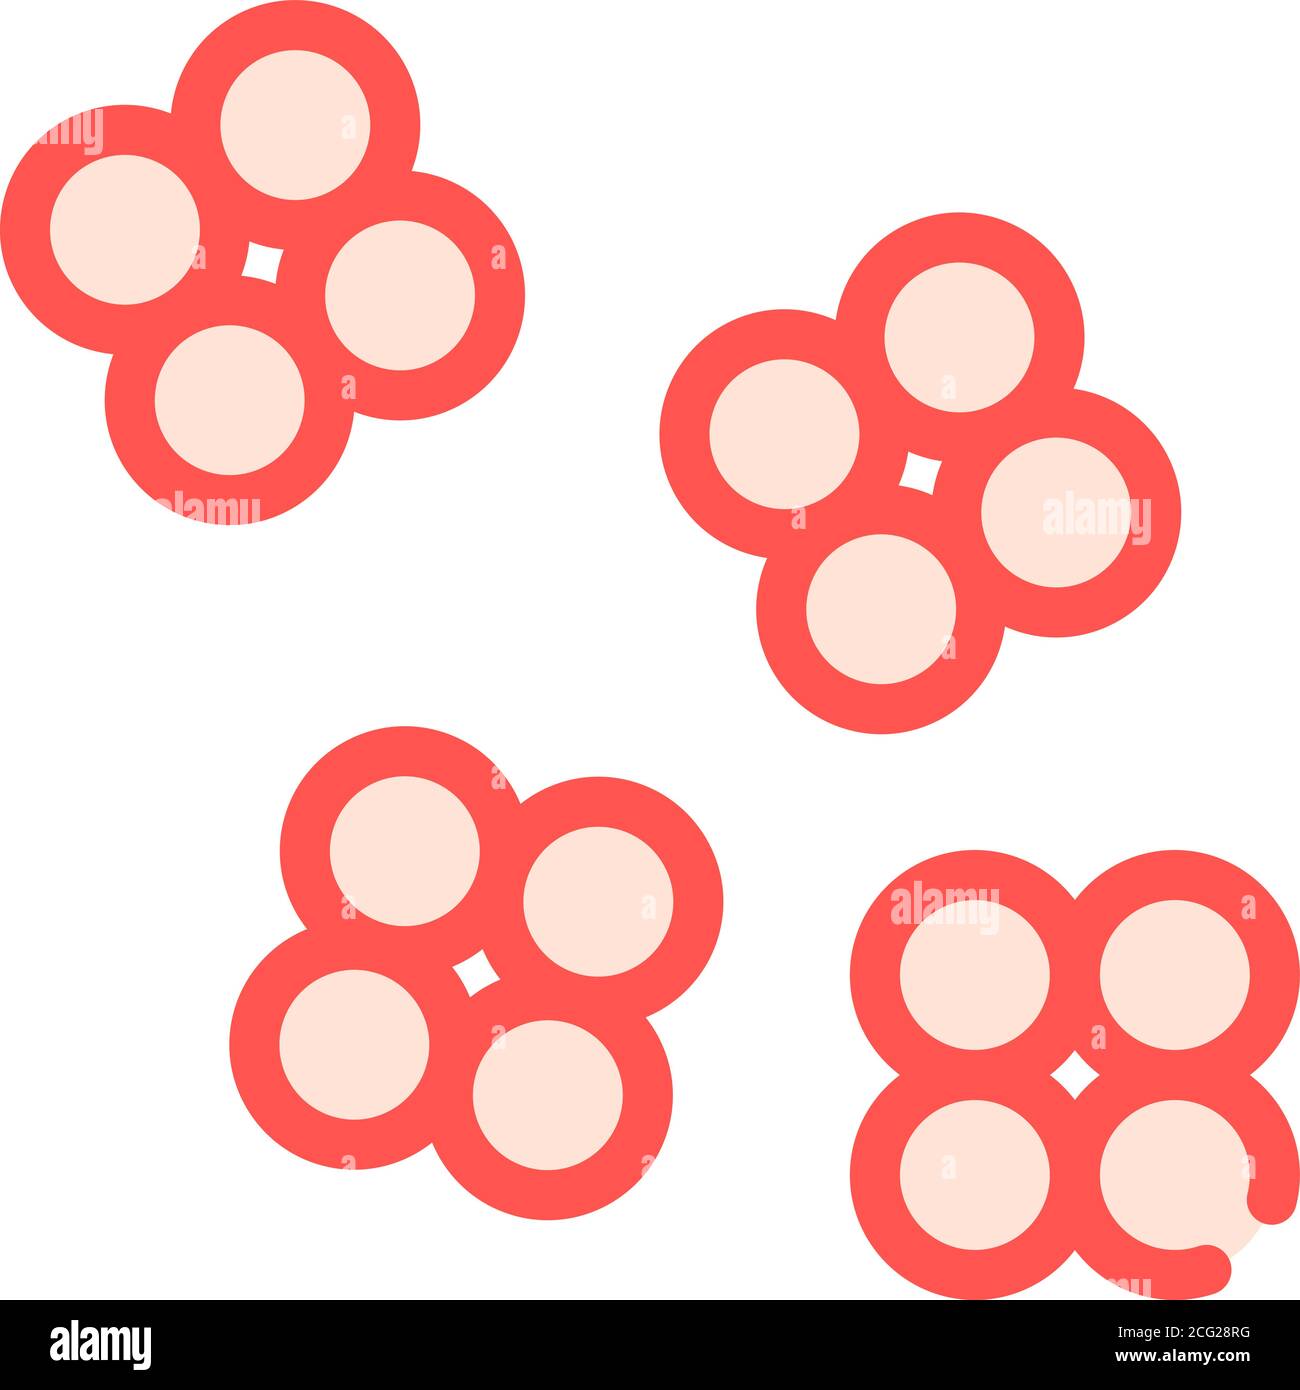 staphylococcus aureus color icon vector isolated illustration Stock Vector